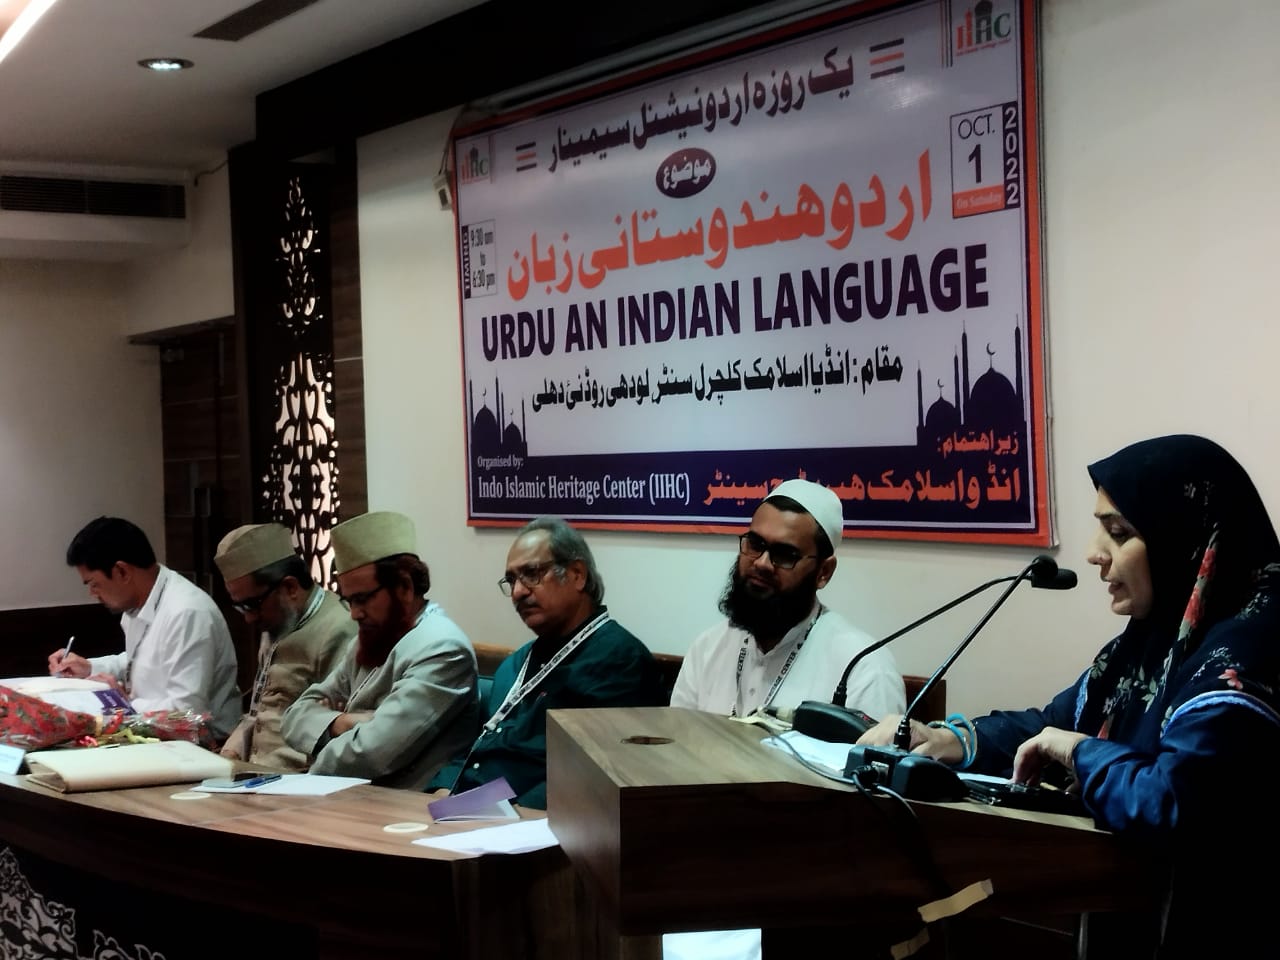 Urdu is not only a language but part of Indian culture